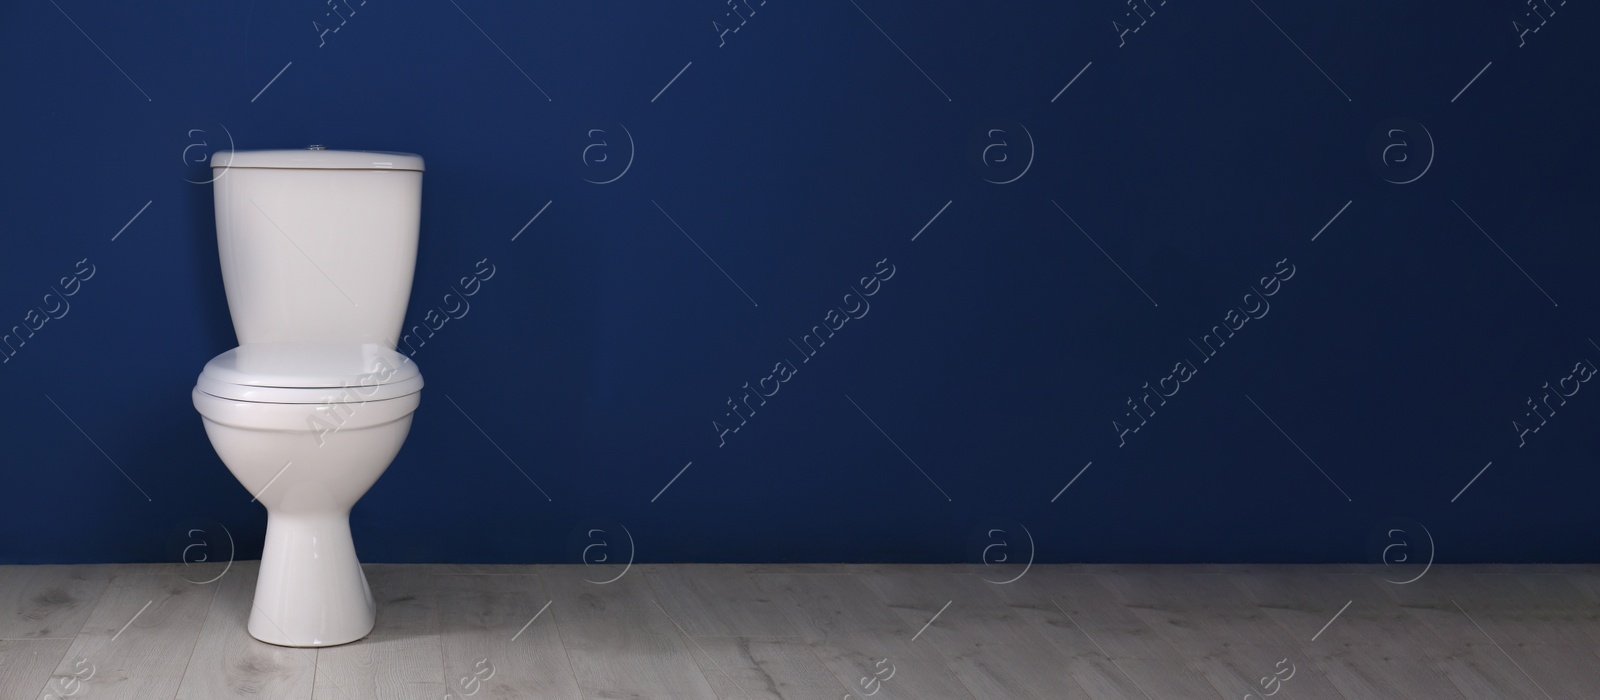 Image of New toilet bowl near blue wall indoors, space for text. Banner design